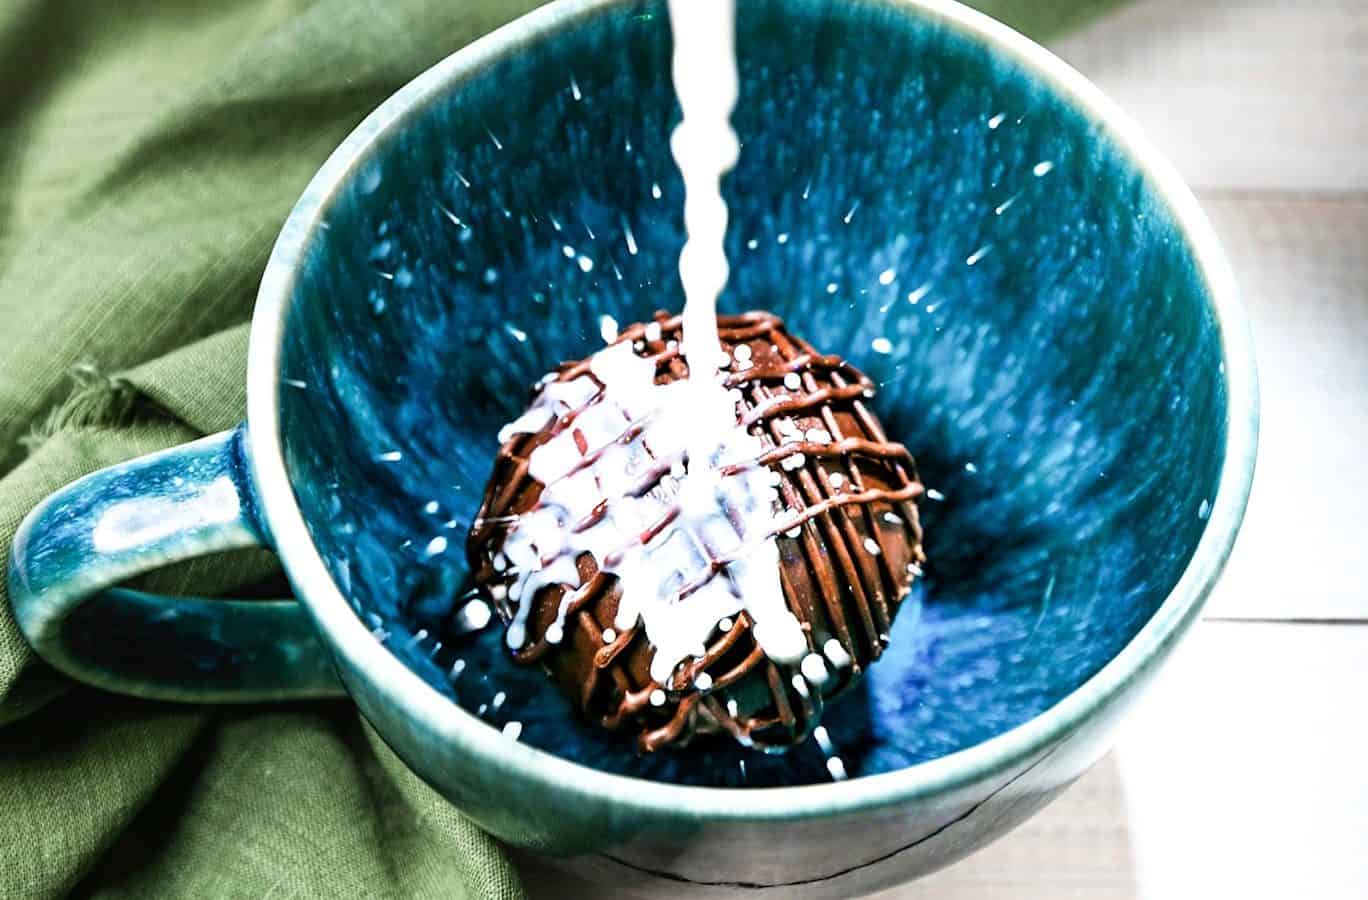 hot chocolate bomb getting non-dairy milk poured on it